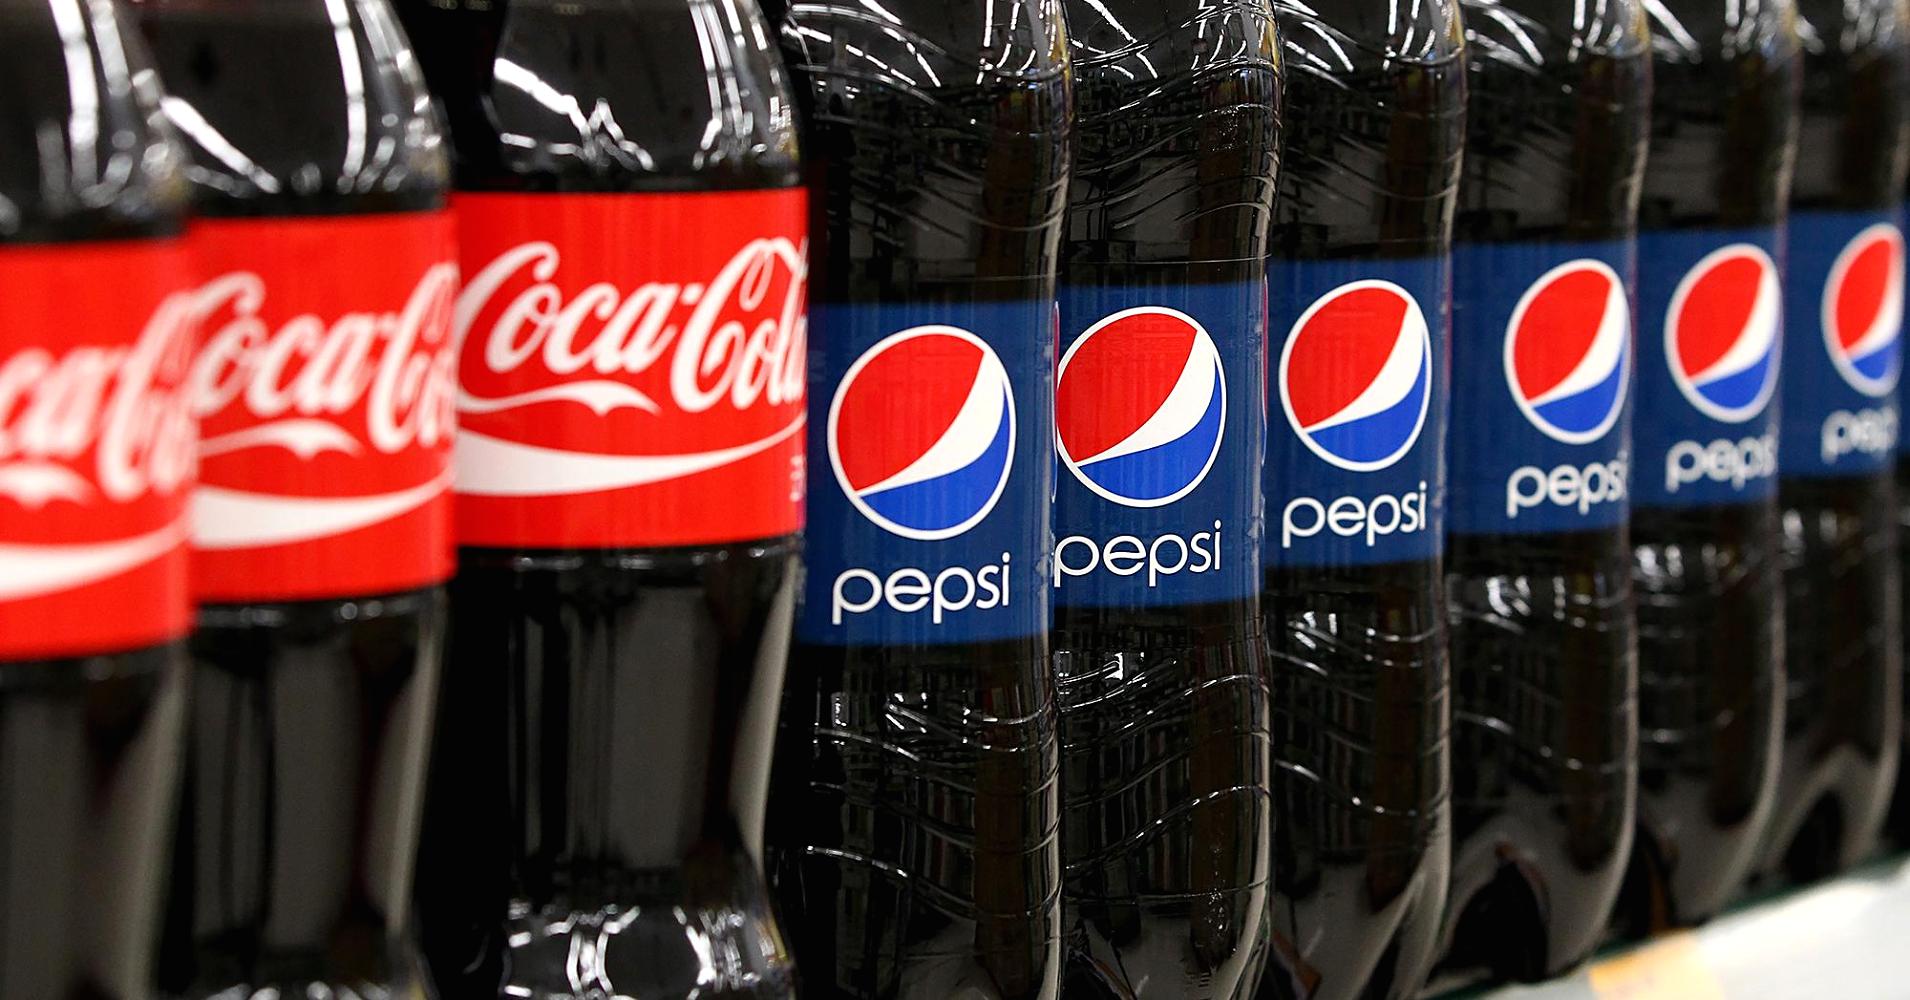 Coca-Cola (KO) And Pepsi (PEP) Spent Millons On Something Very Questionable